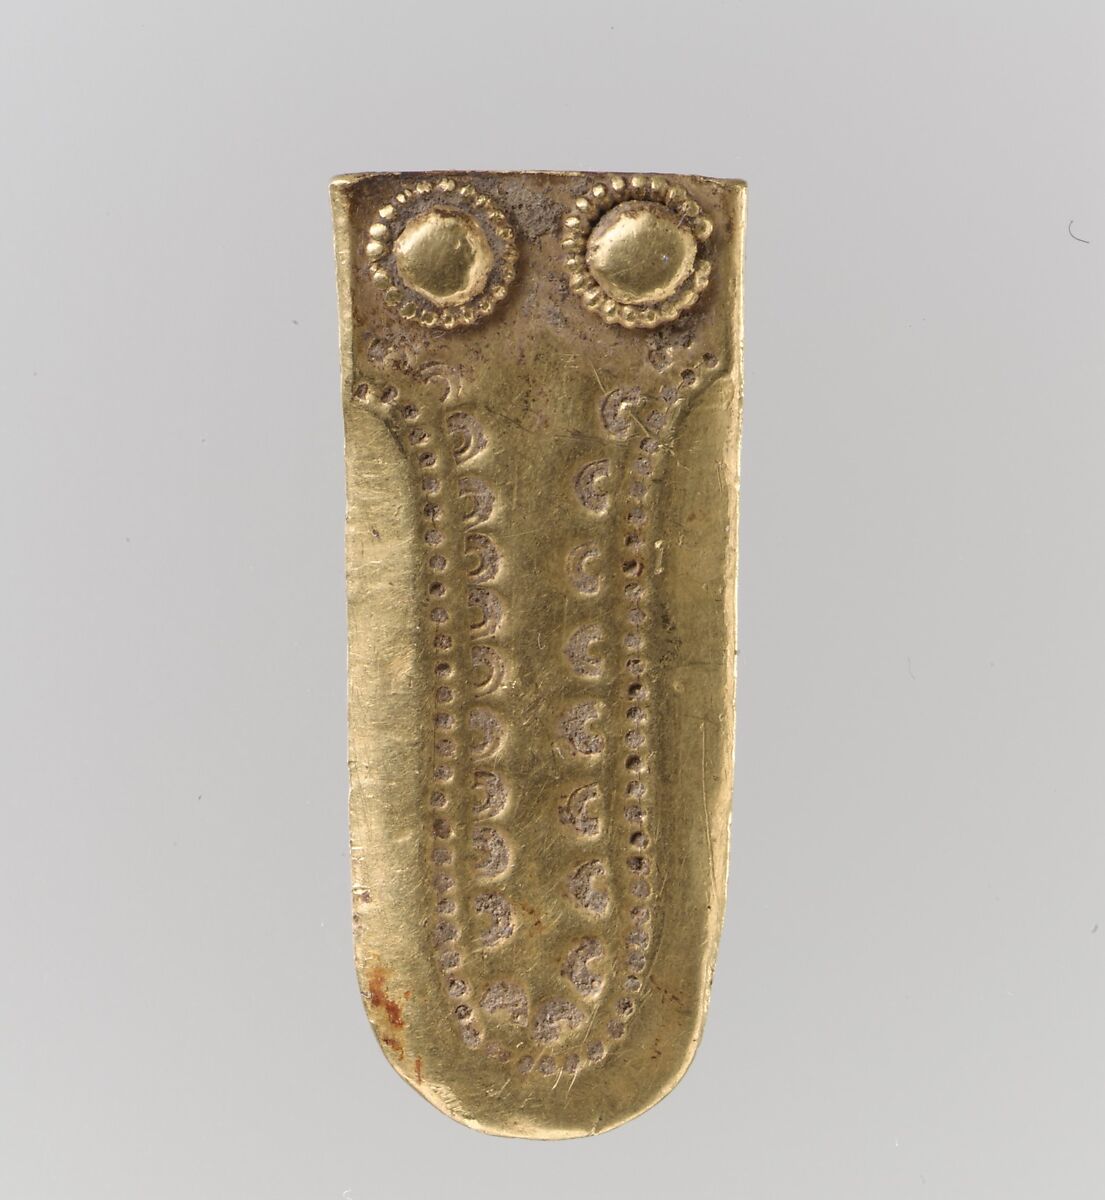 Gold Strap End, Gold and silver, Langobardic 